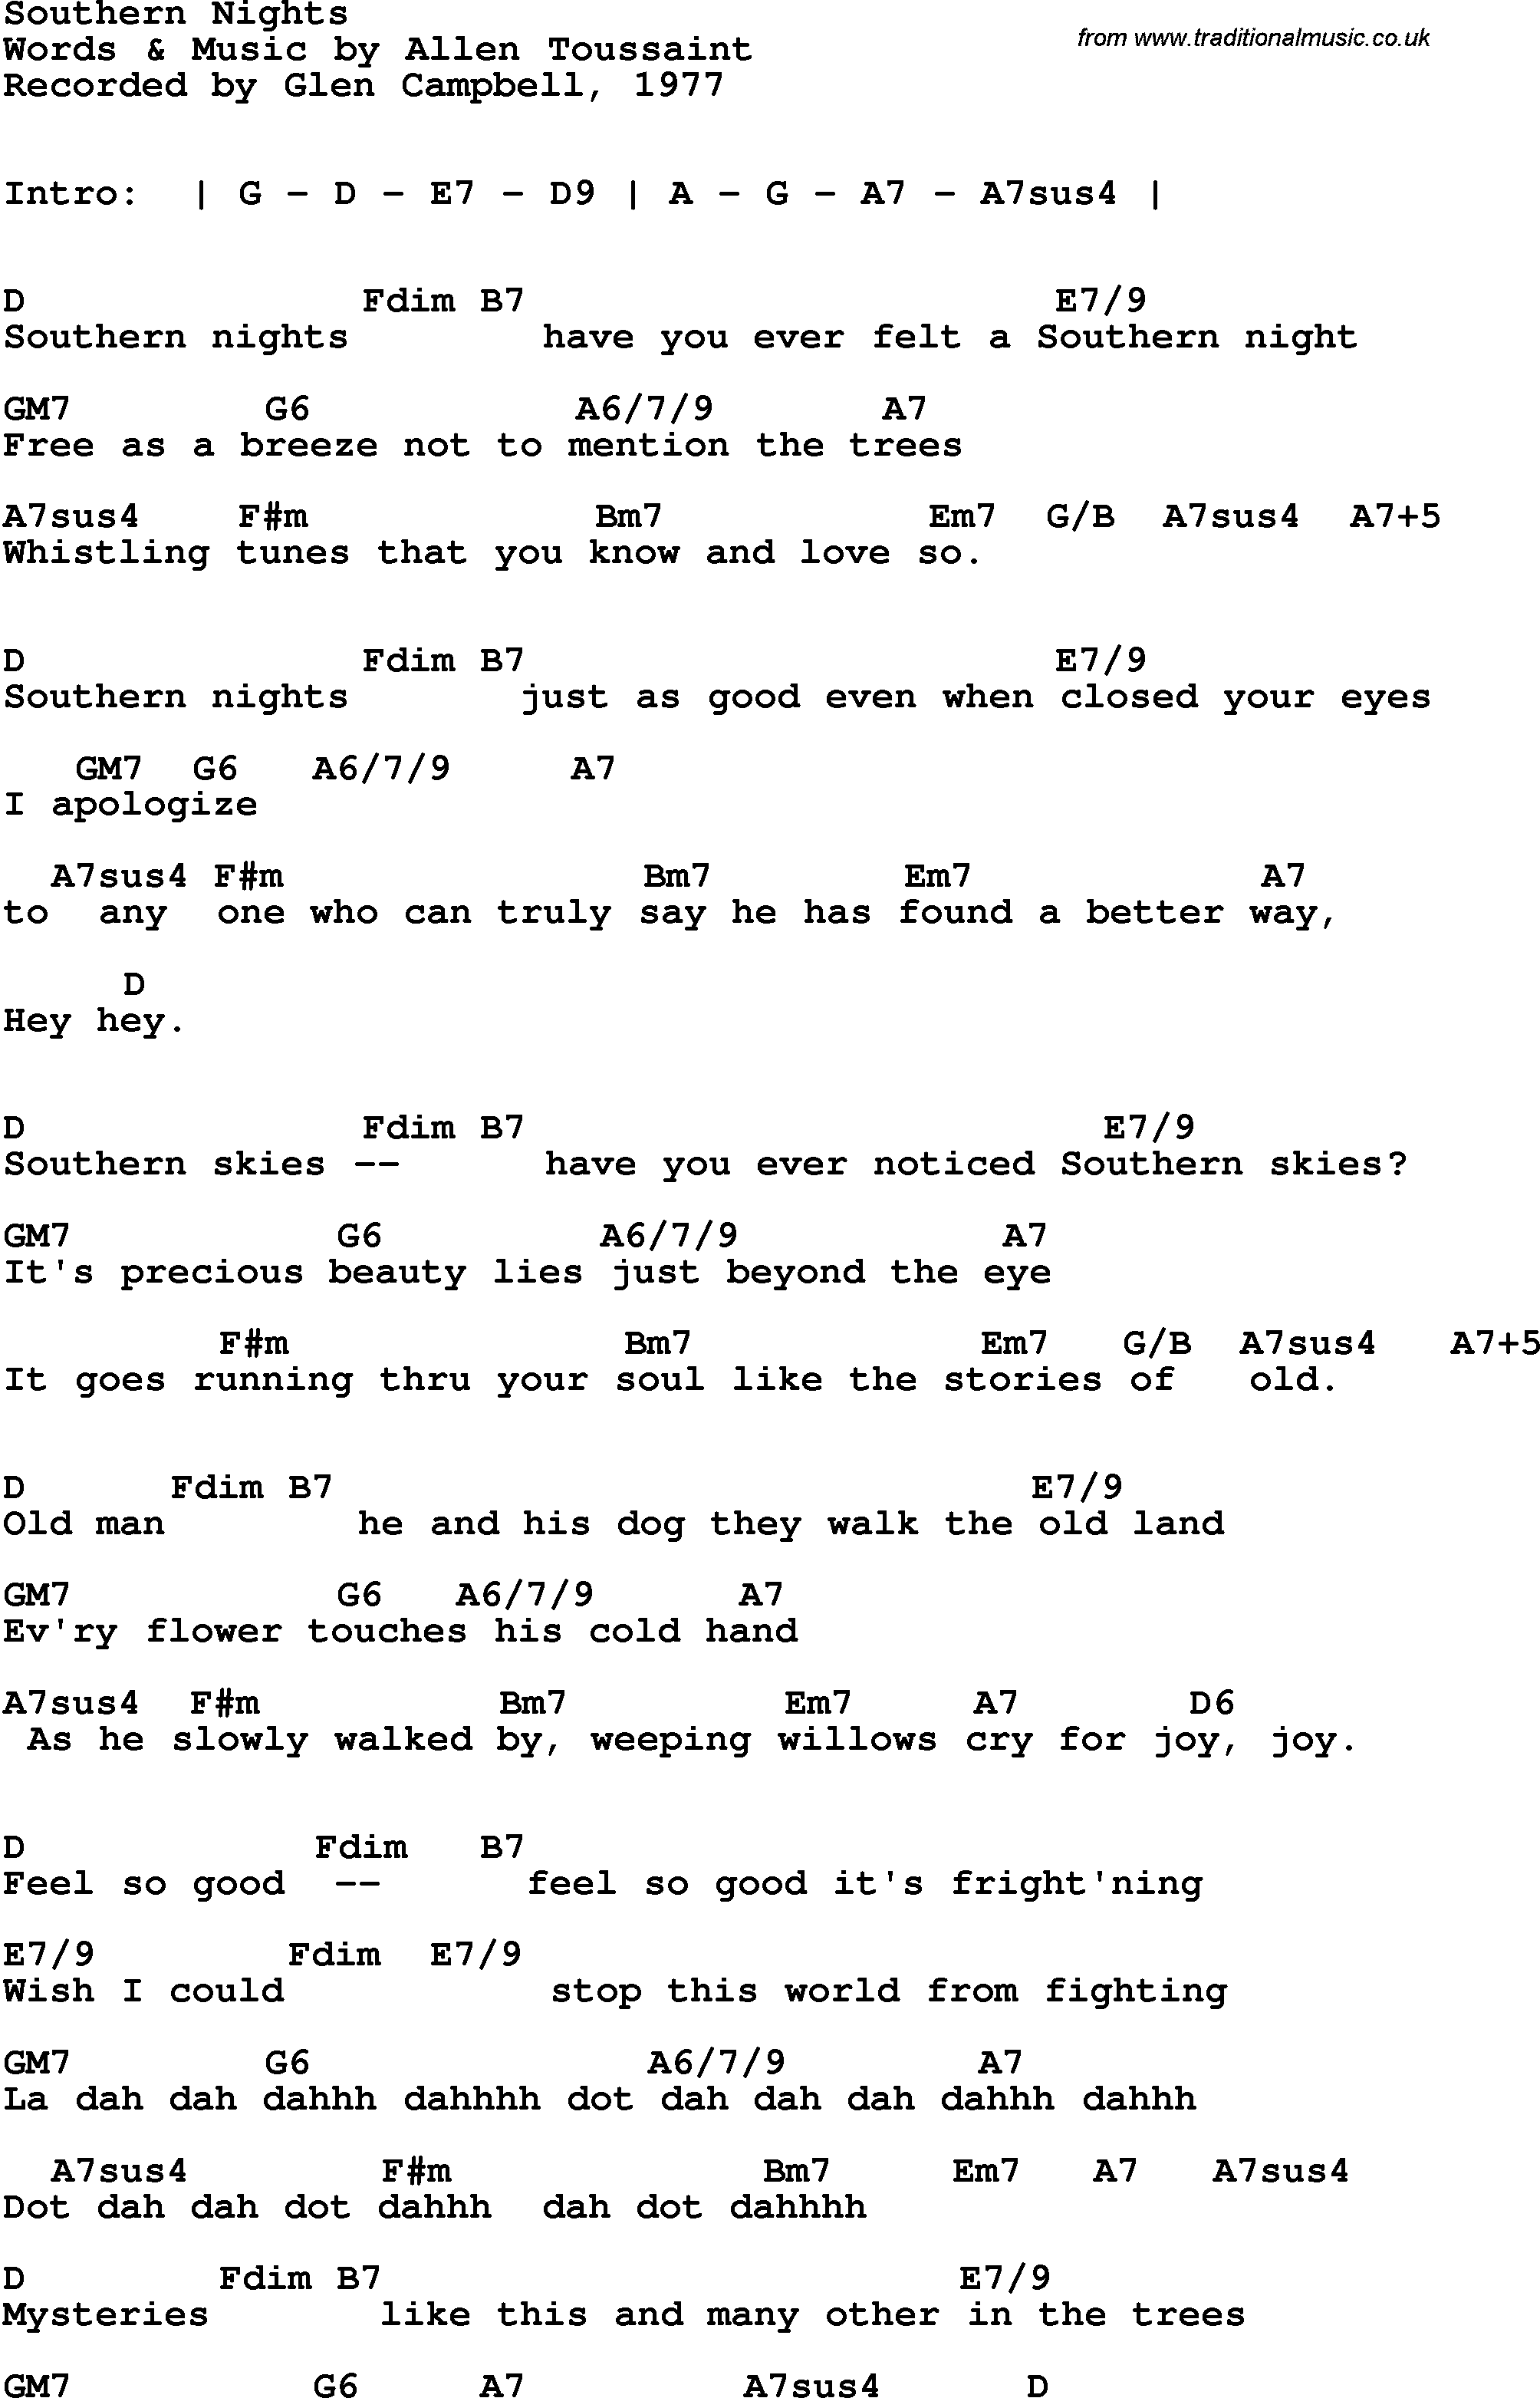 Song Lyrics with guitar chords for Southern Nights - Glenn Campbell, 1977